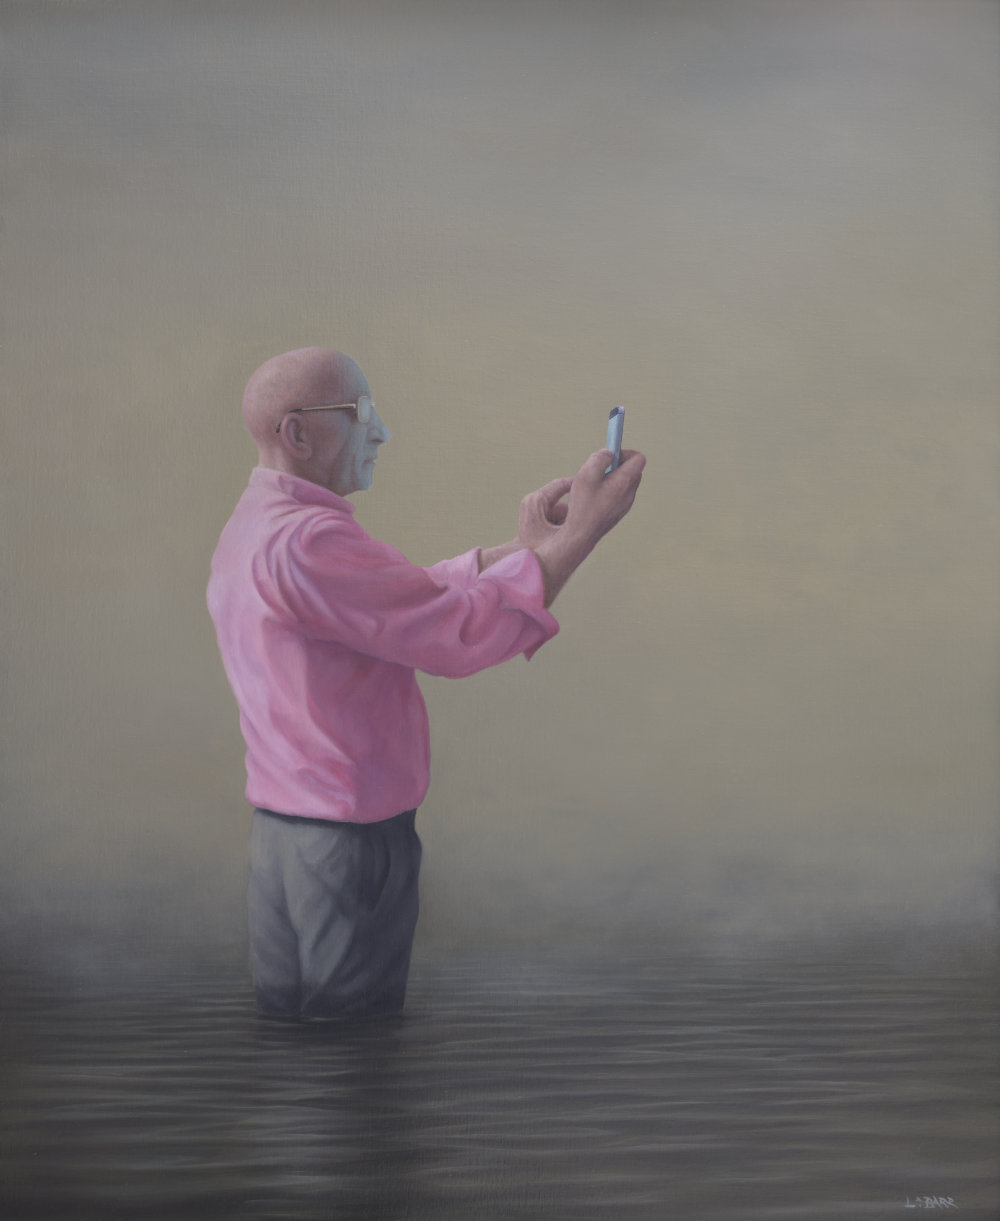 Painting of a man standing in the water with his phone